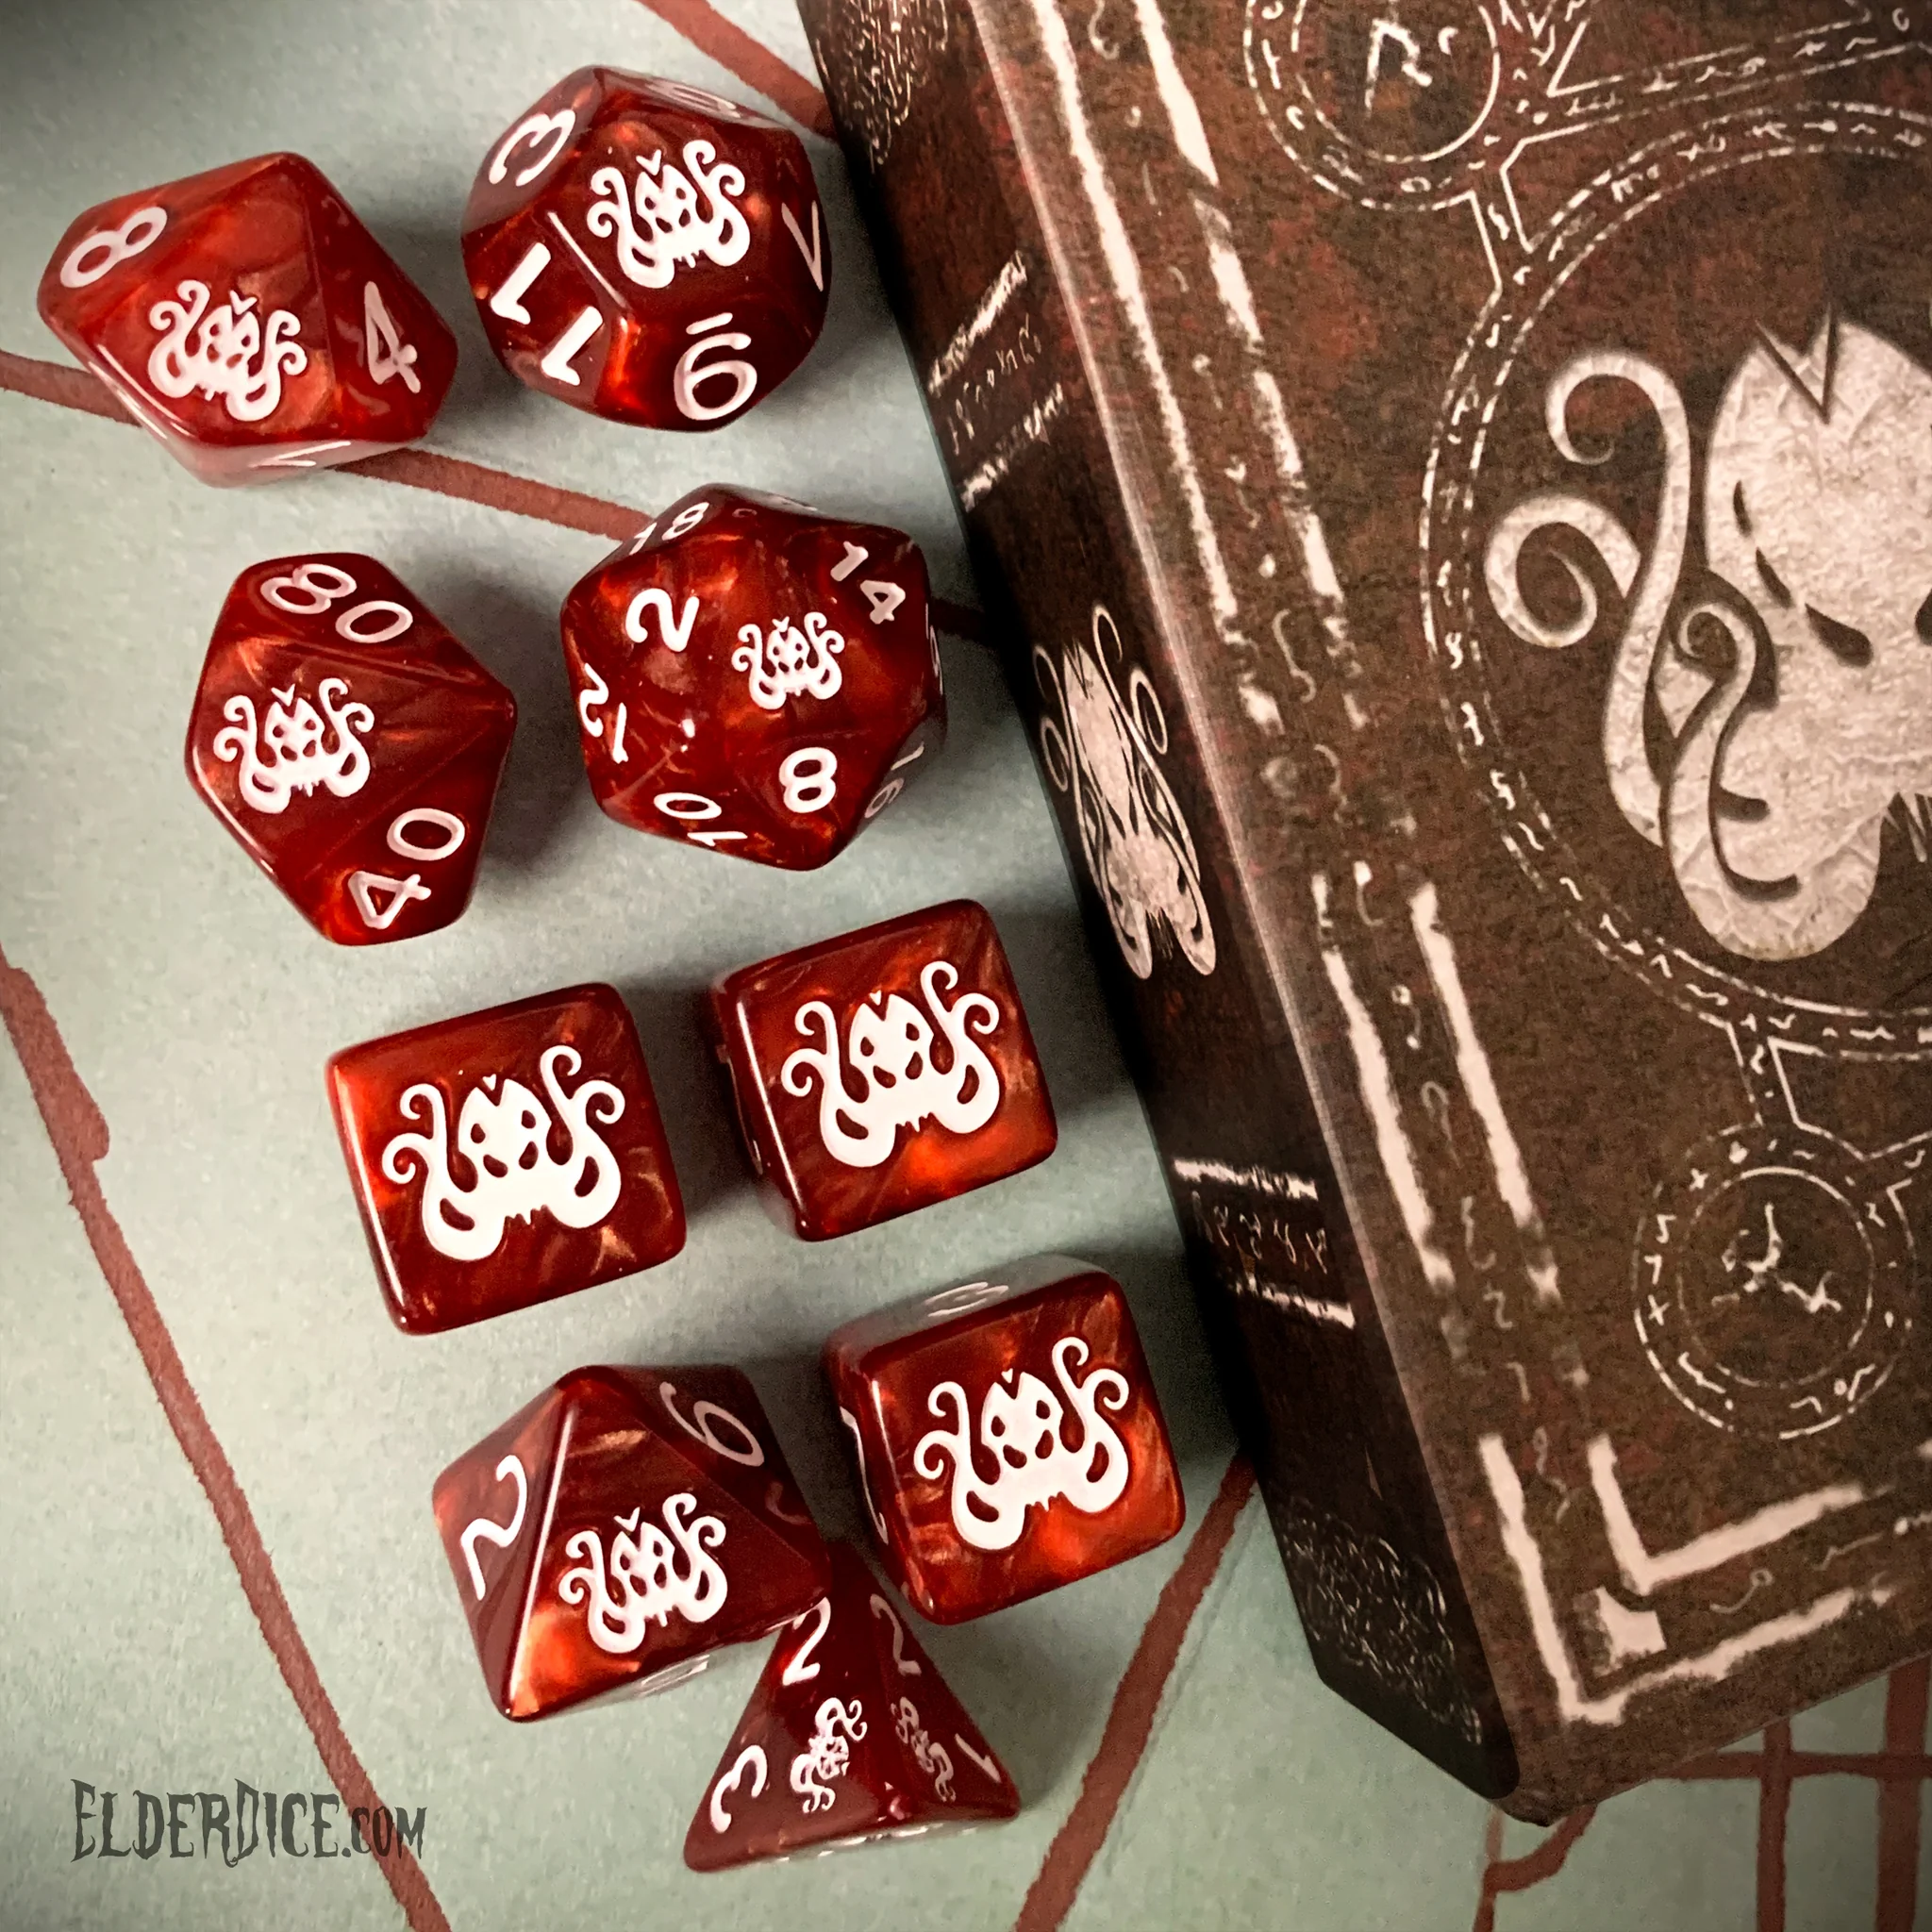 Elder Dice Polyhedral Set: Cthulhu: Red with Bone White 